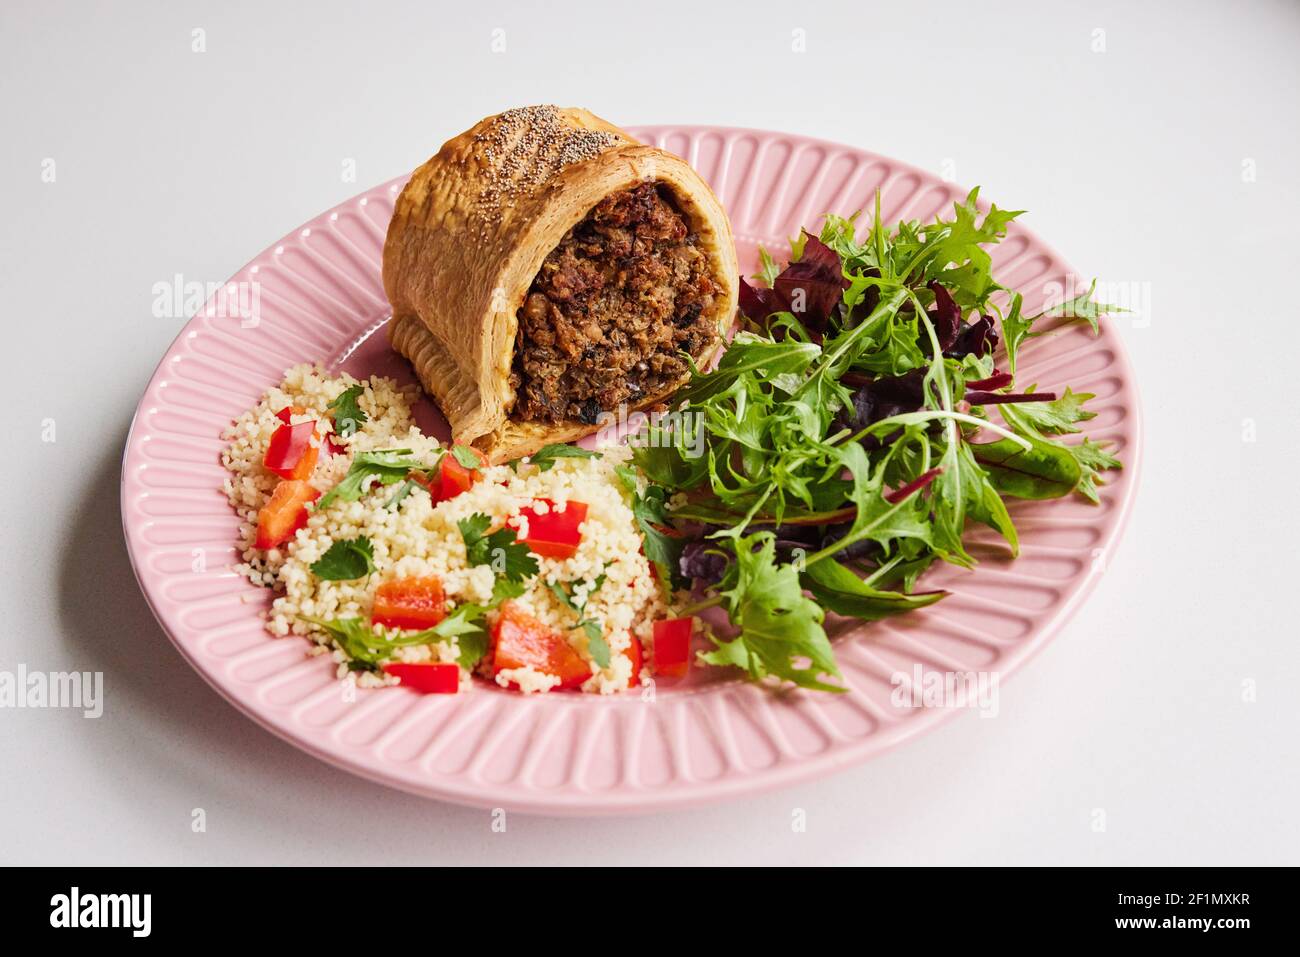 Vegan Meal On Plate With Savoury Roll Filled With Chickpea Lentil And Mushroom Next To Couscous And Salad On White Background Stock Photo